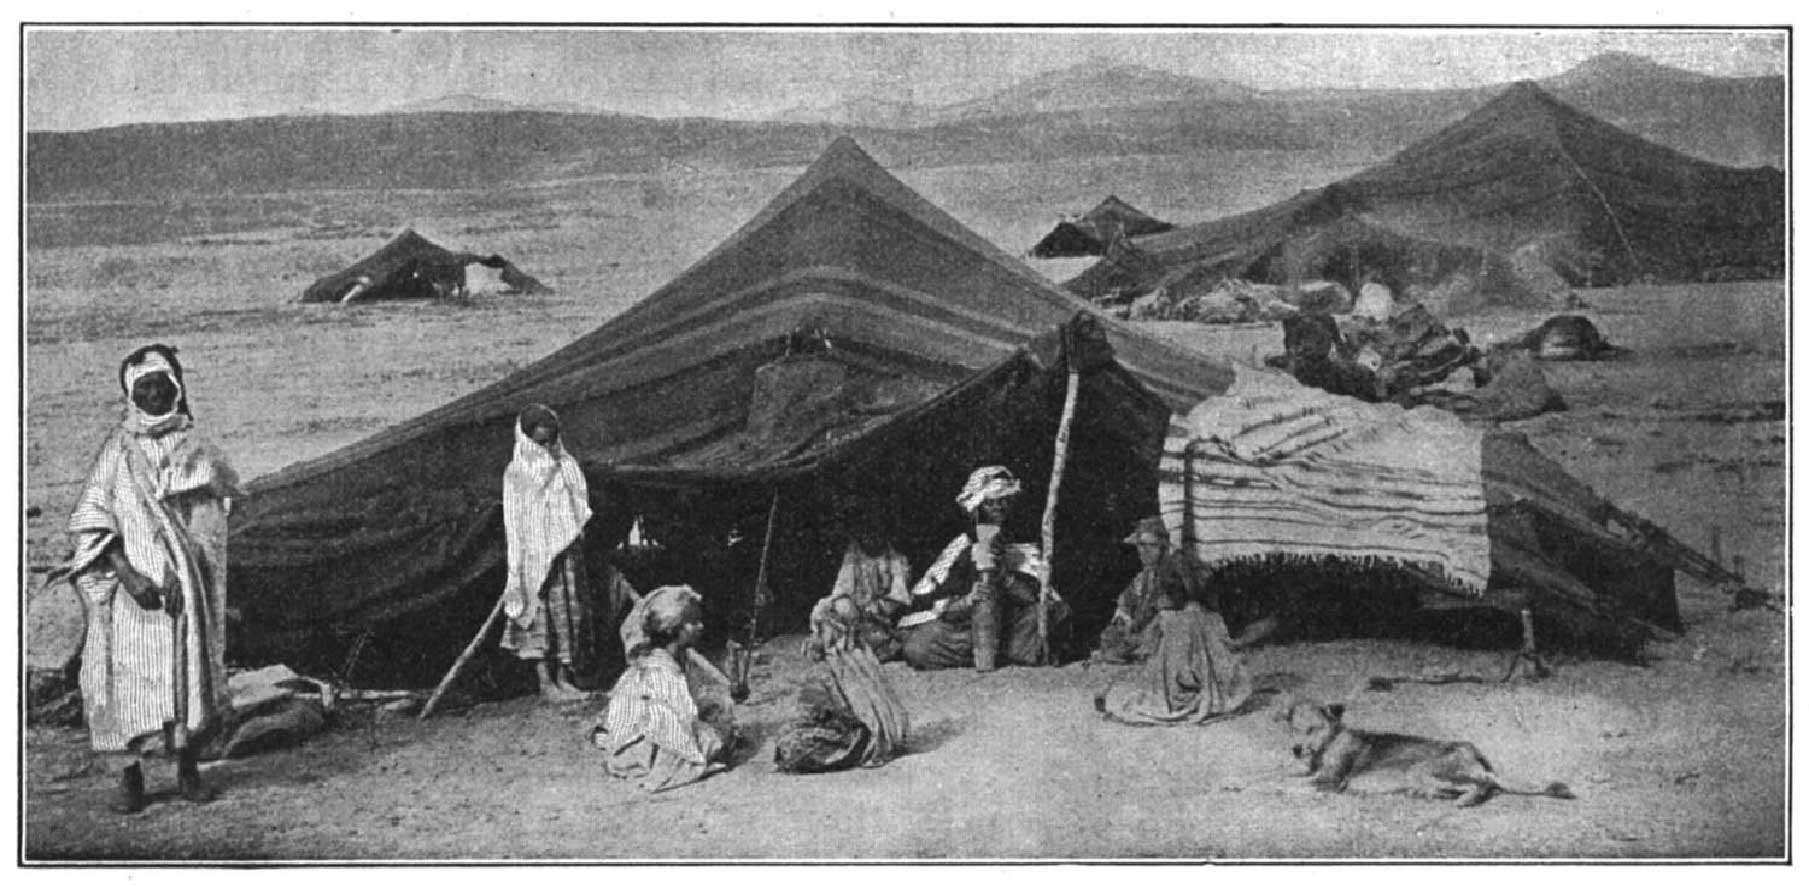 Title: World's Geographies (1919)?Author: Tarr and McMurry?Illustrator: NA?Publisher: McMillan Co.?Copyright (c) 1996 Zedcor Inc. All Rights Reserved.?Keywords: Nomads Algeria desert Biskra Africa woman children tents, b/w??